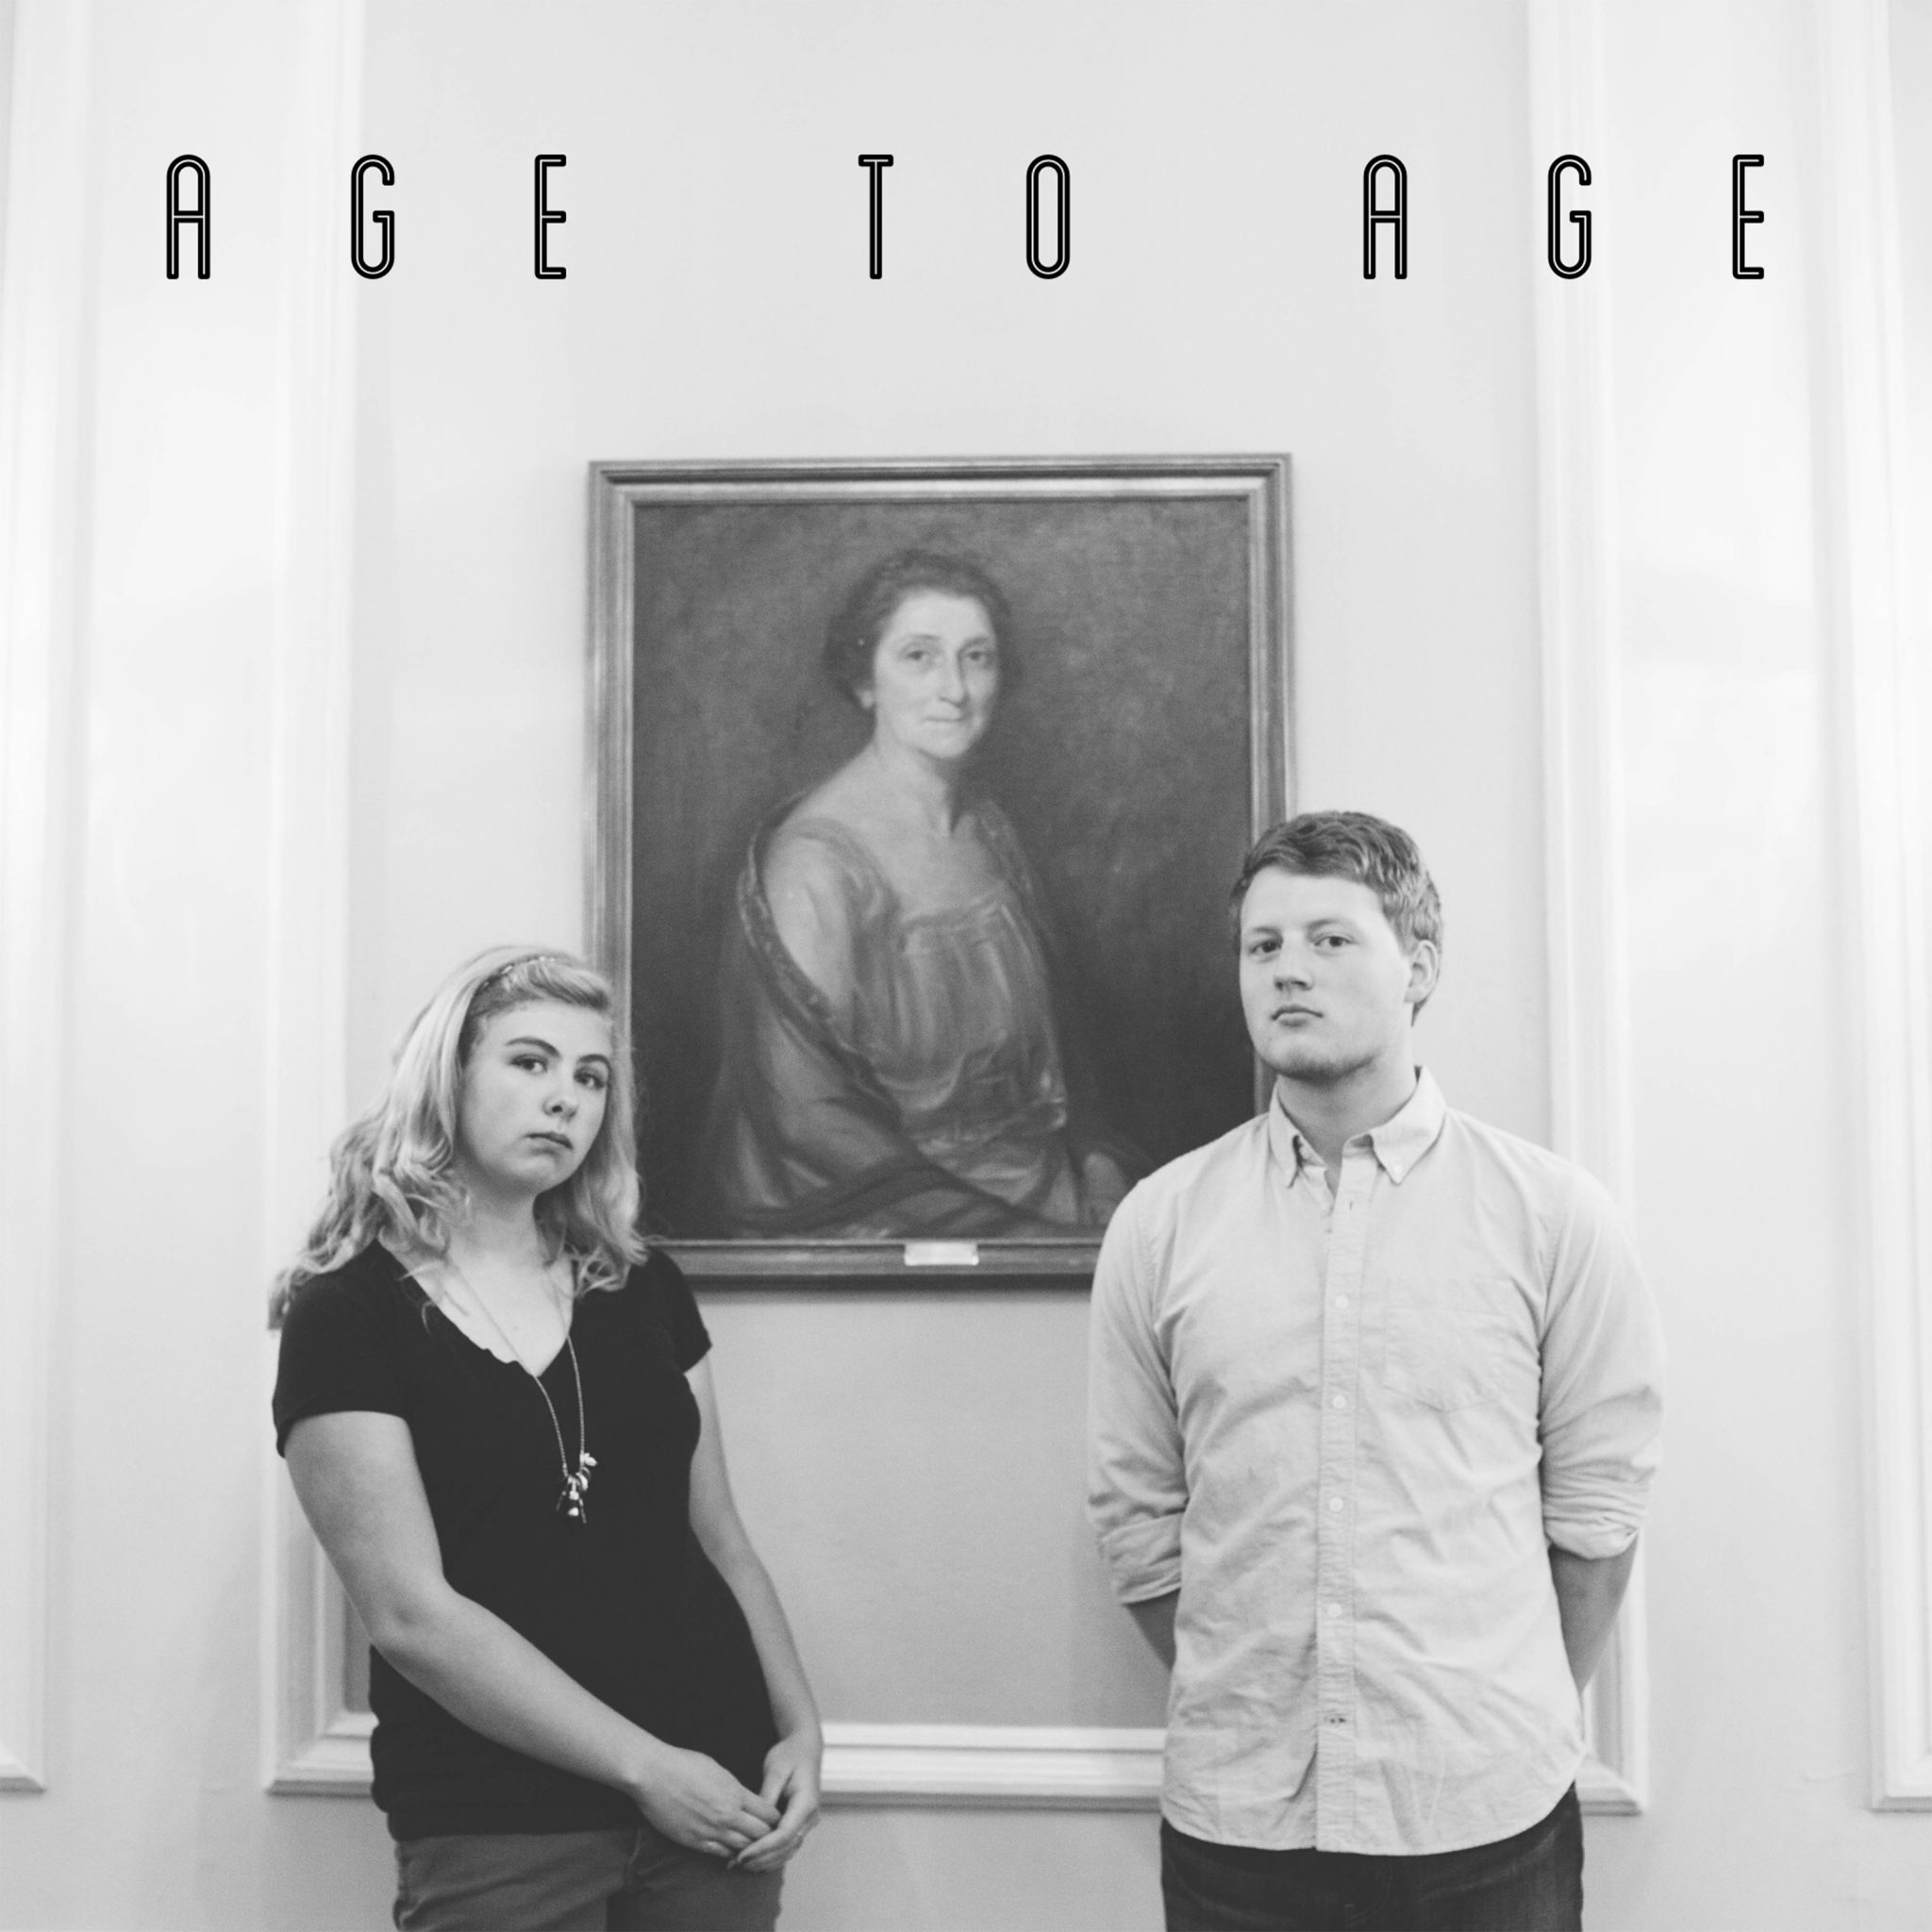 Chris Renzema/Centricity Music album “Age To Age” on WorshipTeam